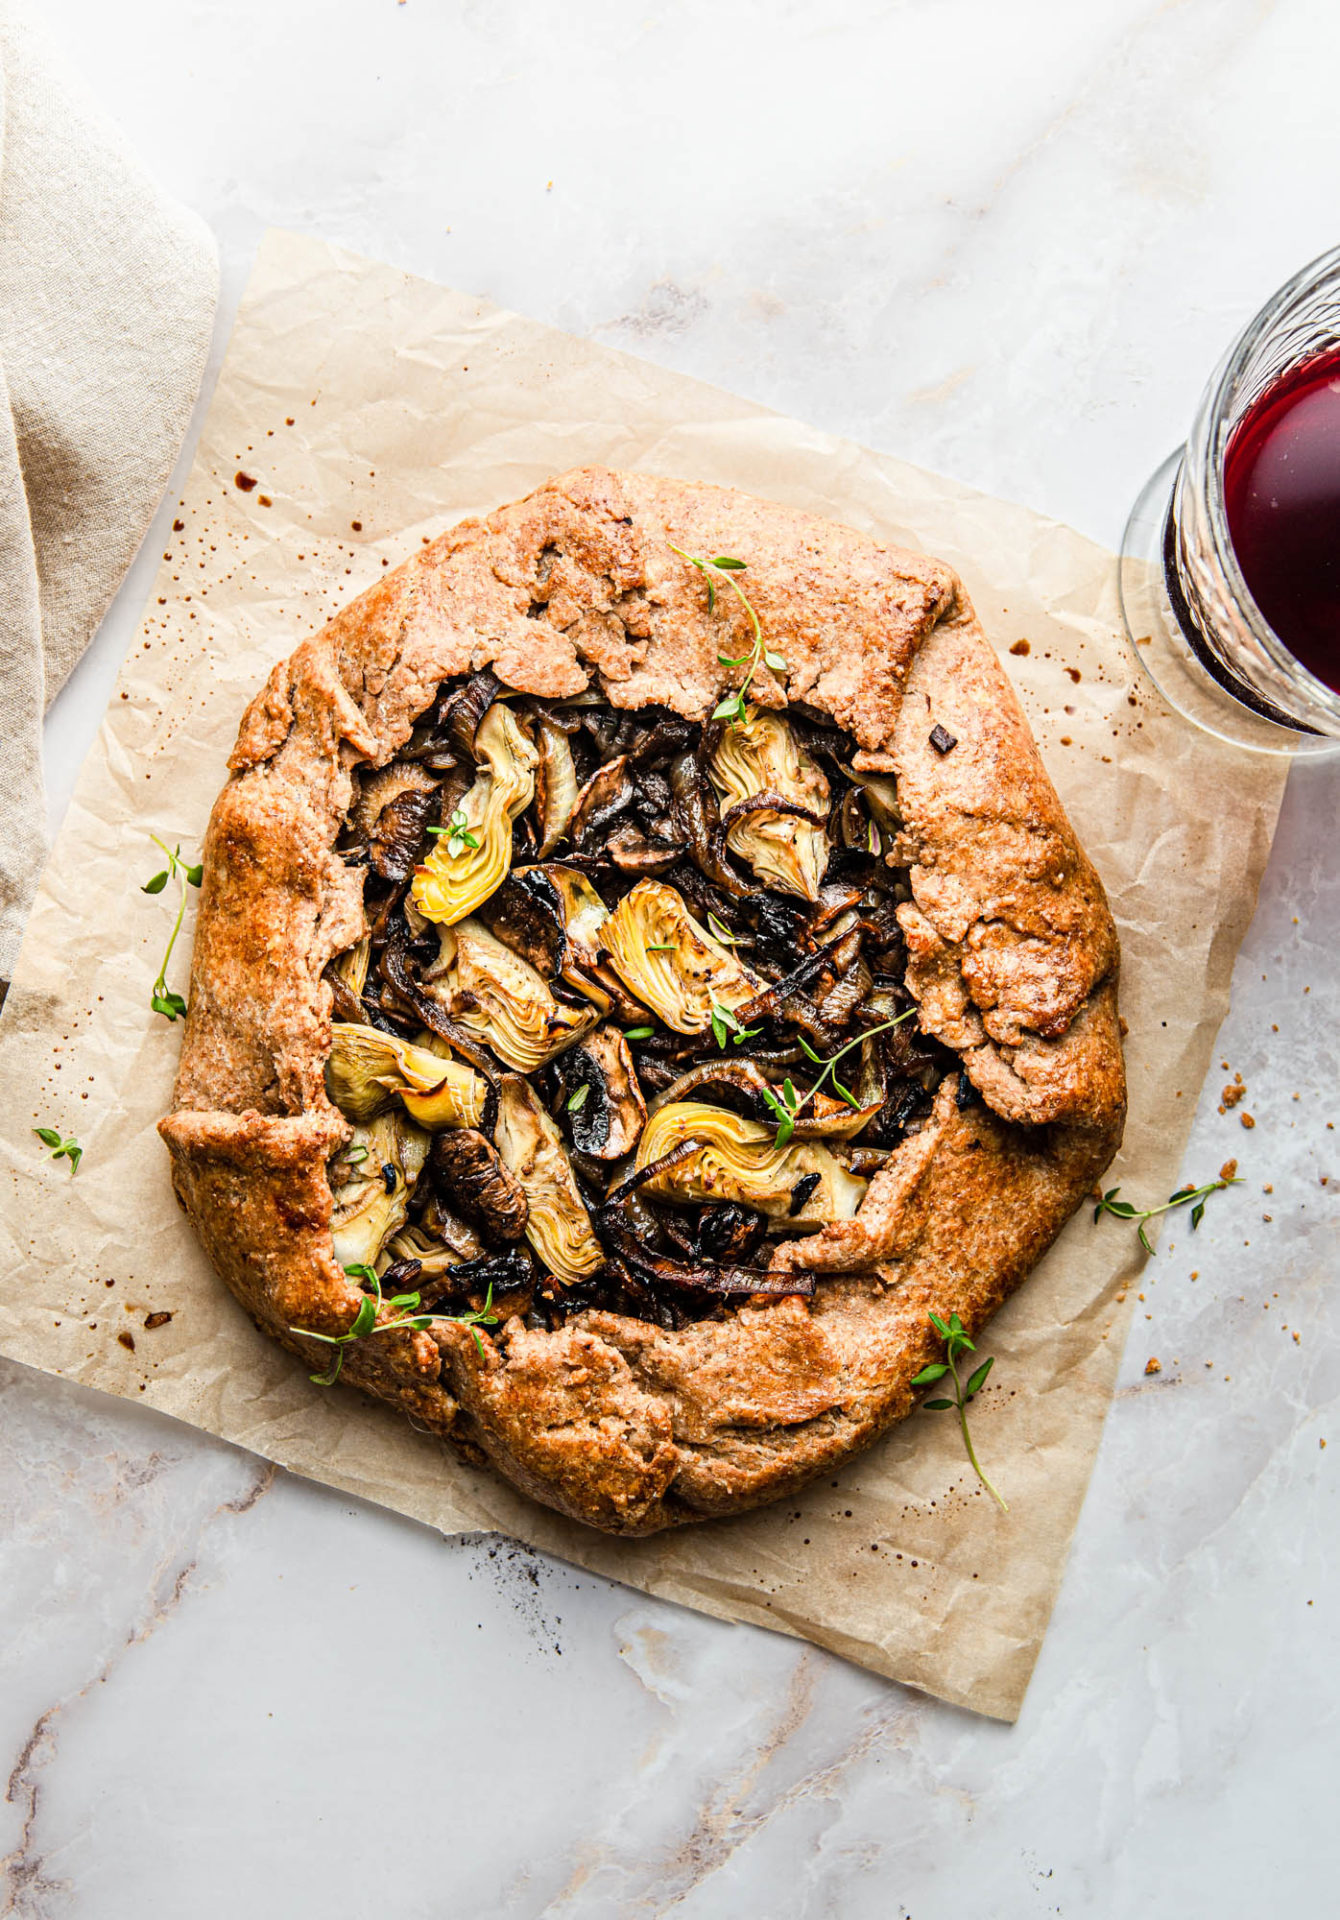 rustic galette with mushrooms onions and artichokes with glass of red wine